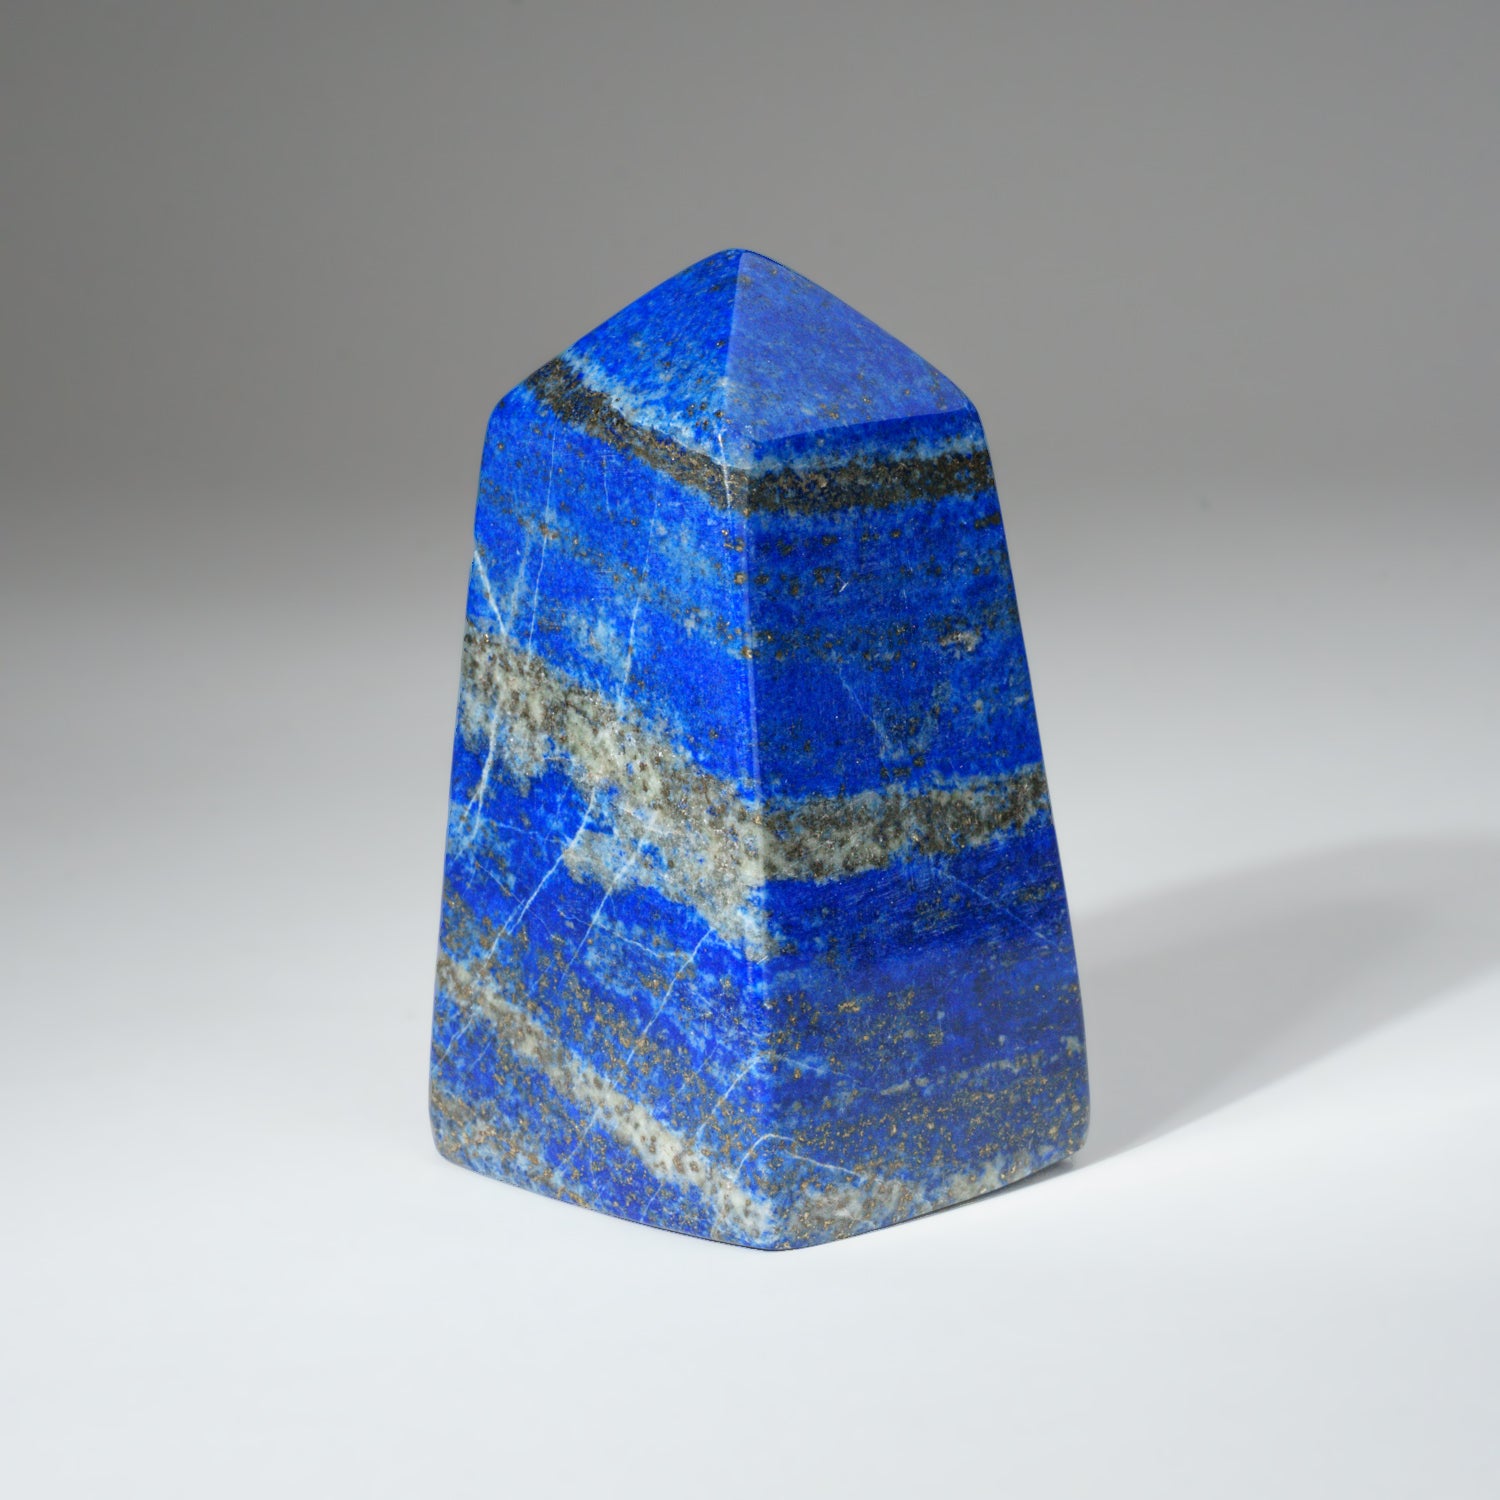 Polished Lapis Lazuli Point from Afghanistan (381.6 grams)